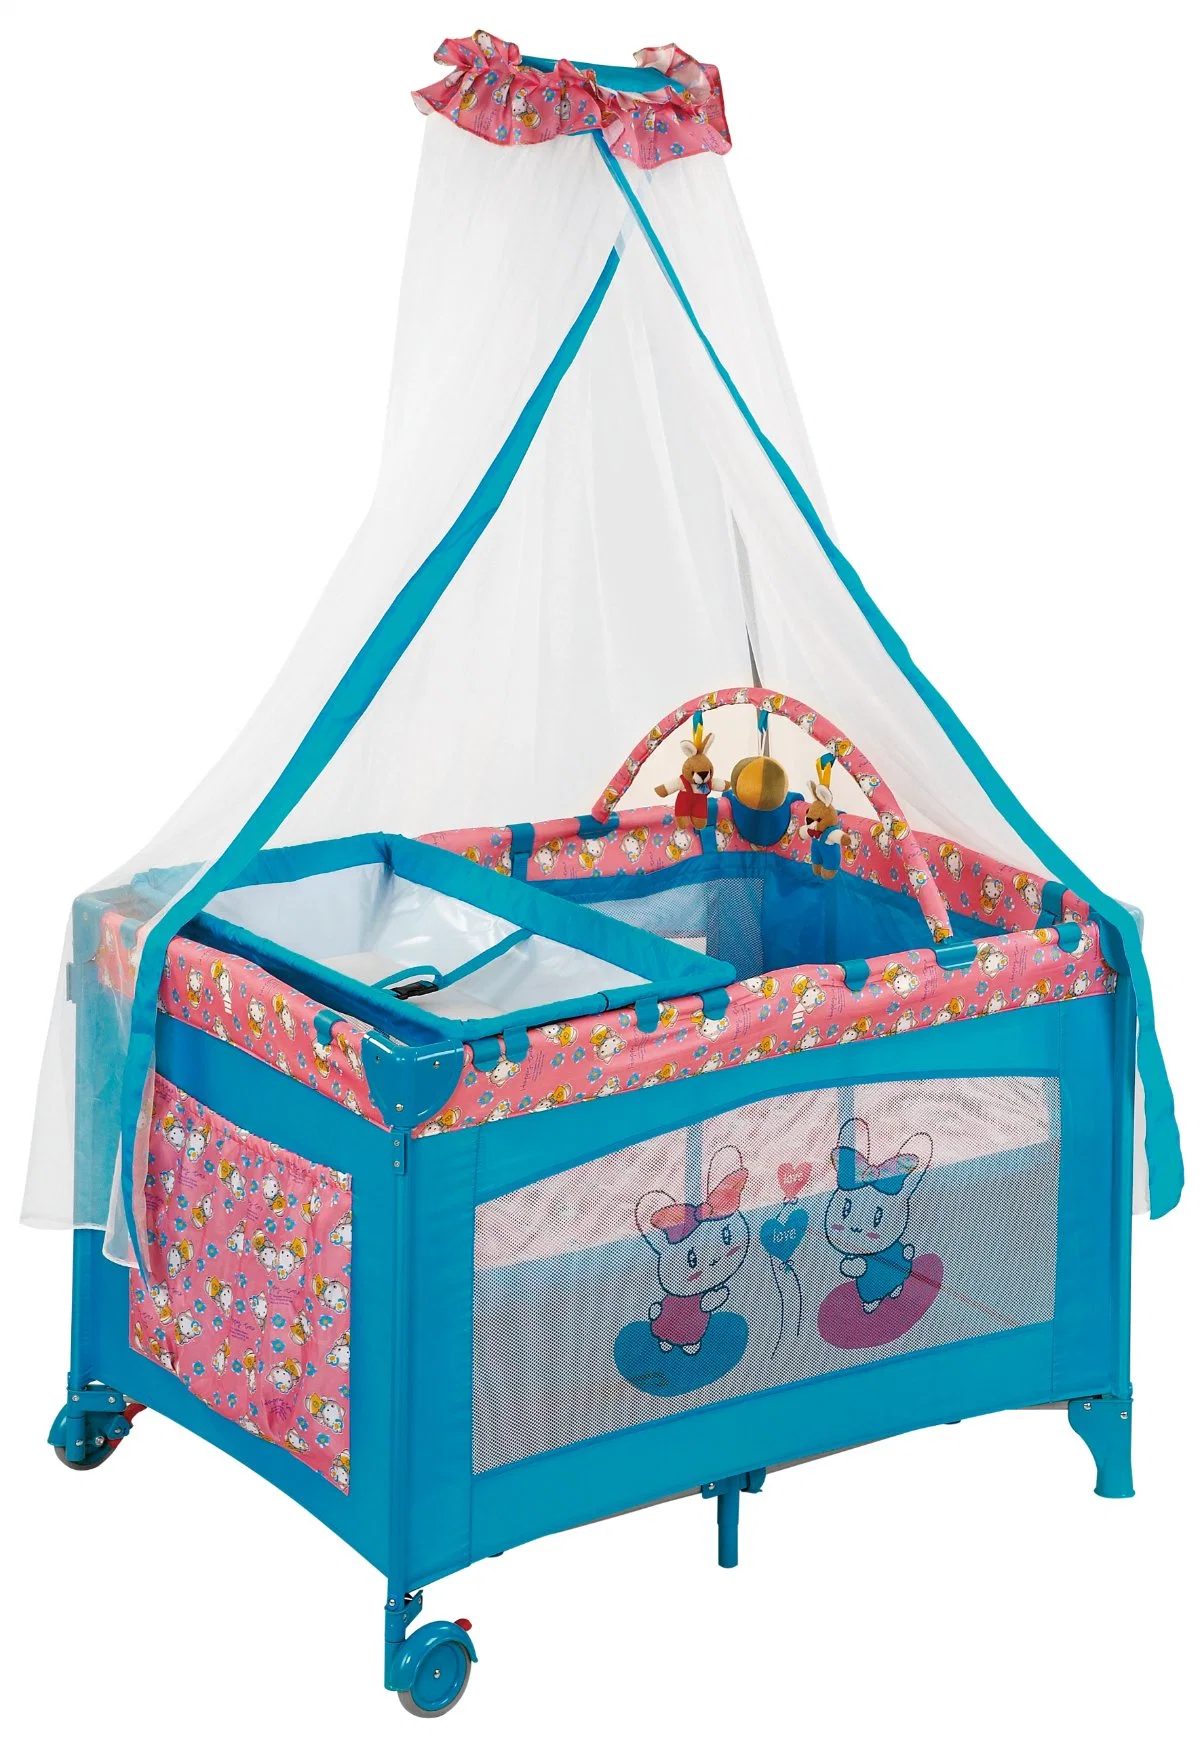 Baby Bed with Mosquito Net, Changing Table and Double Floor